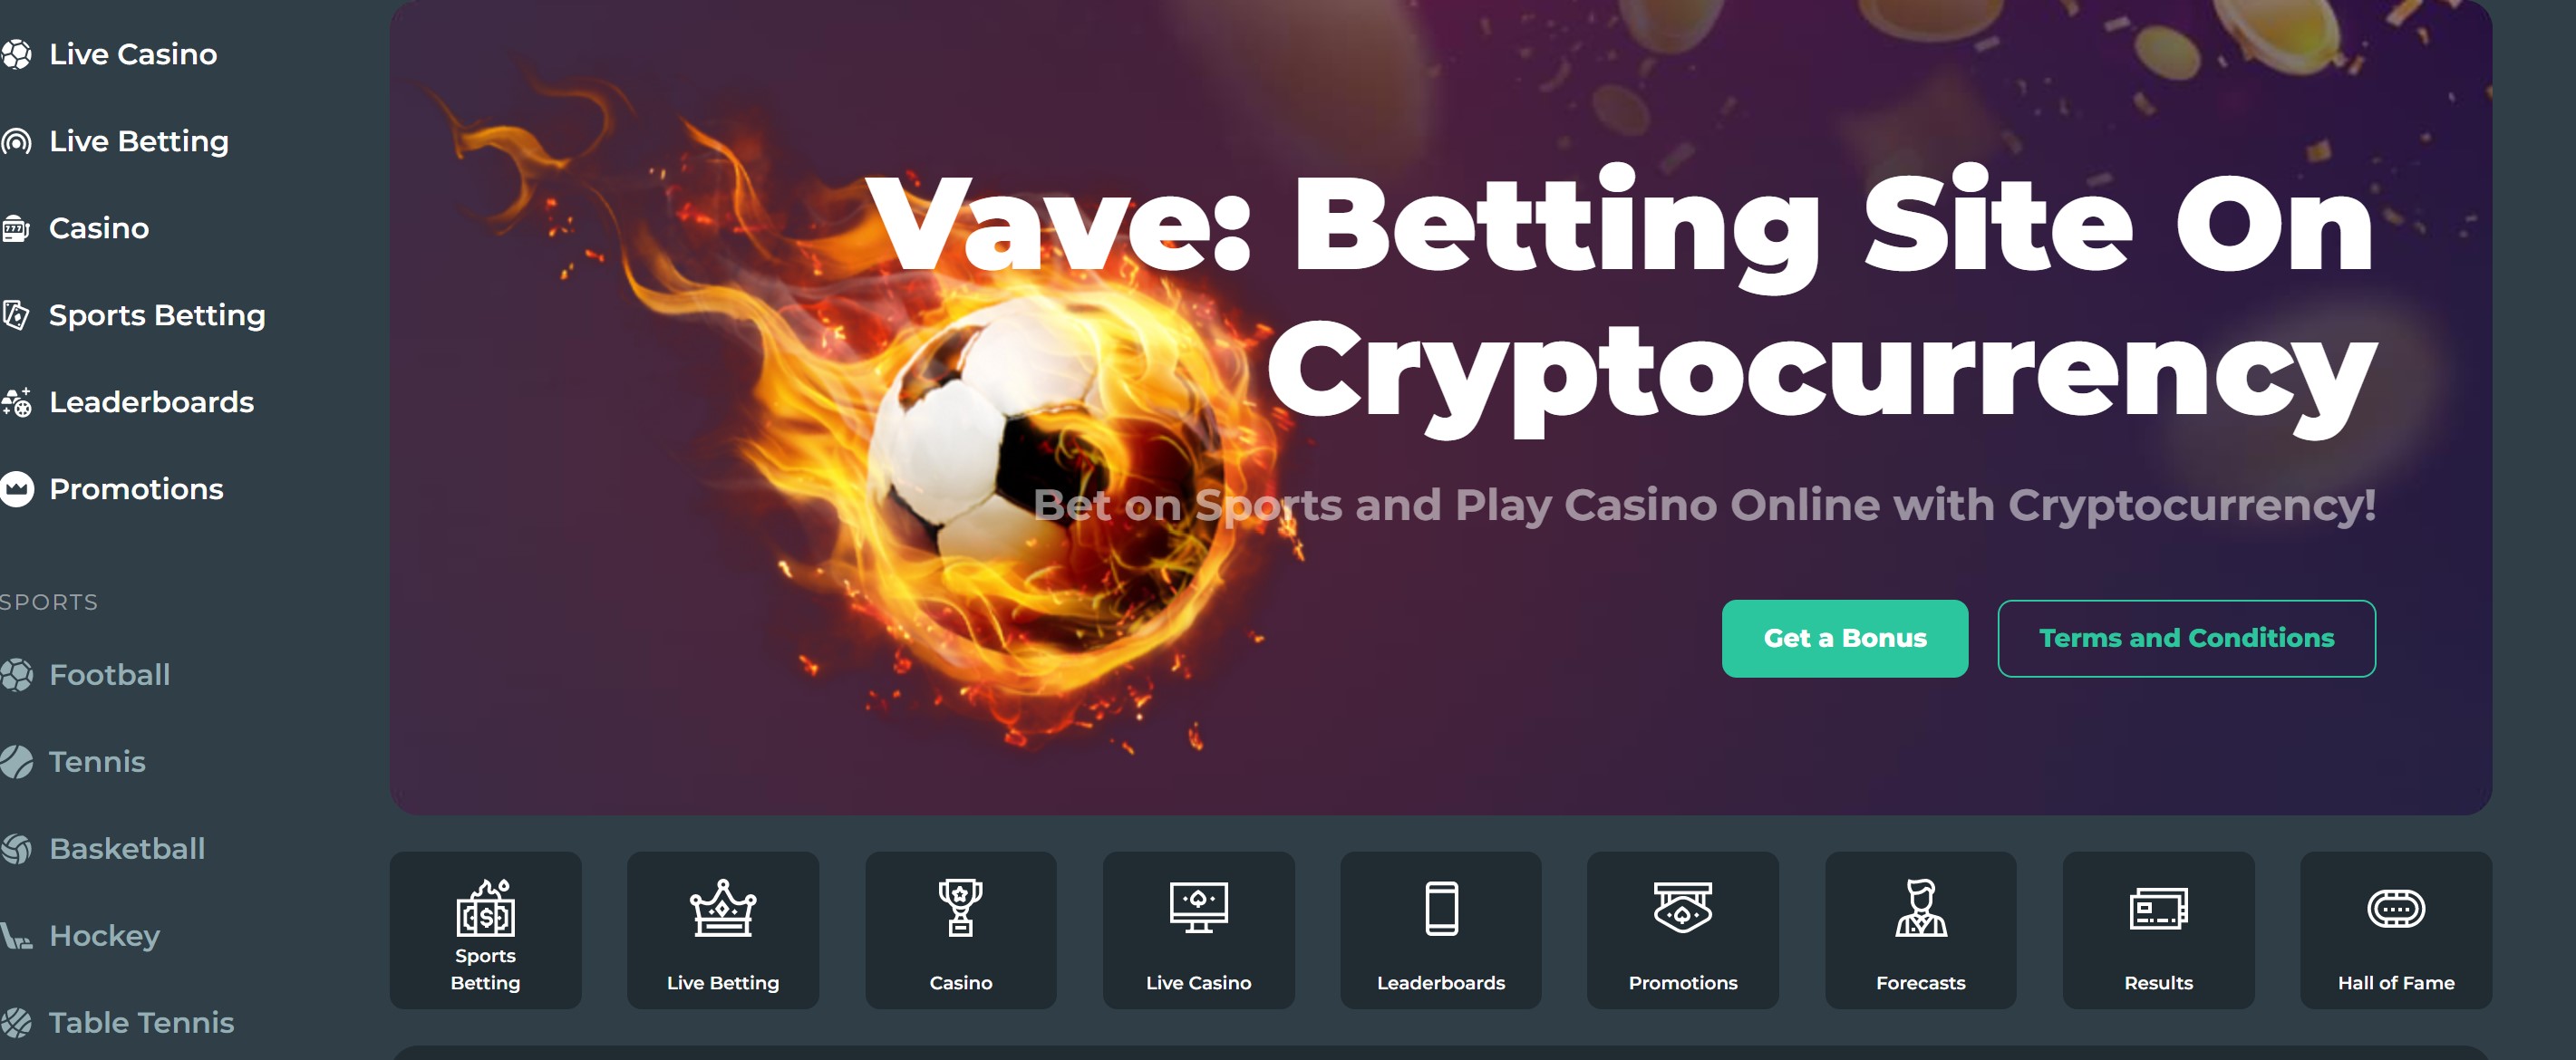 Vave crypto betting site and casino